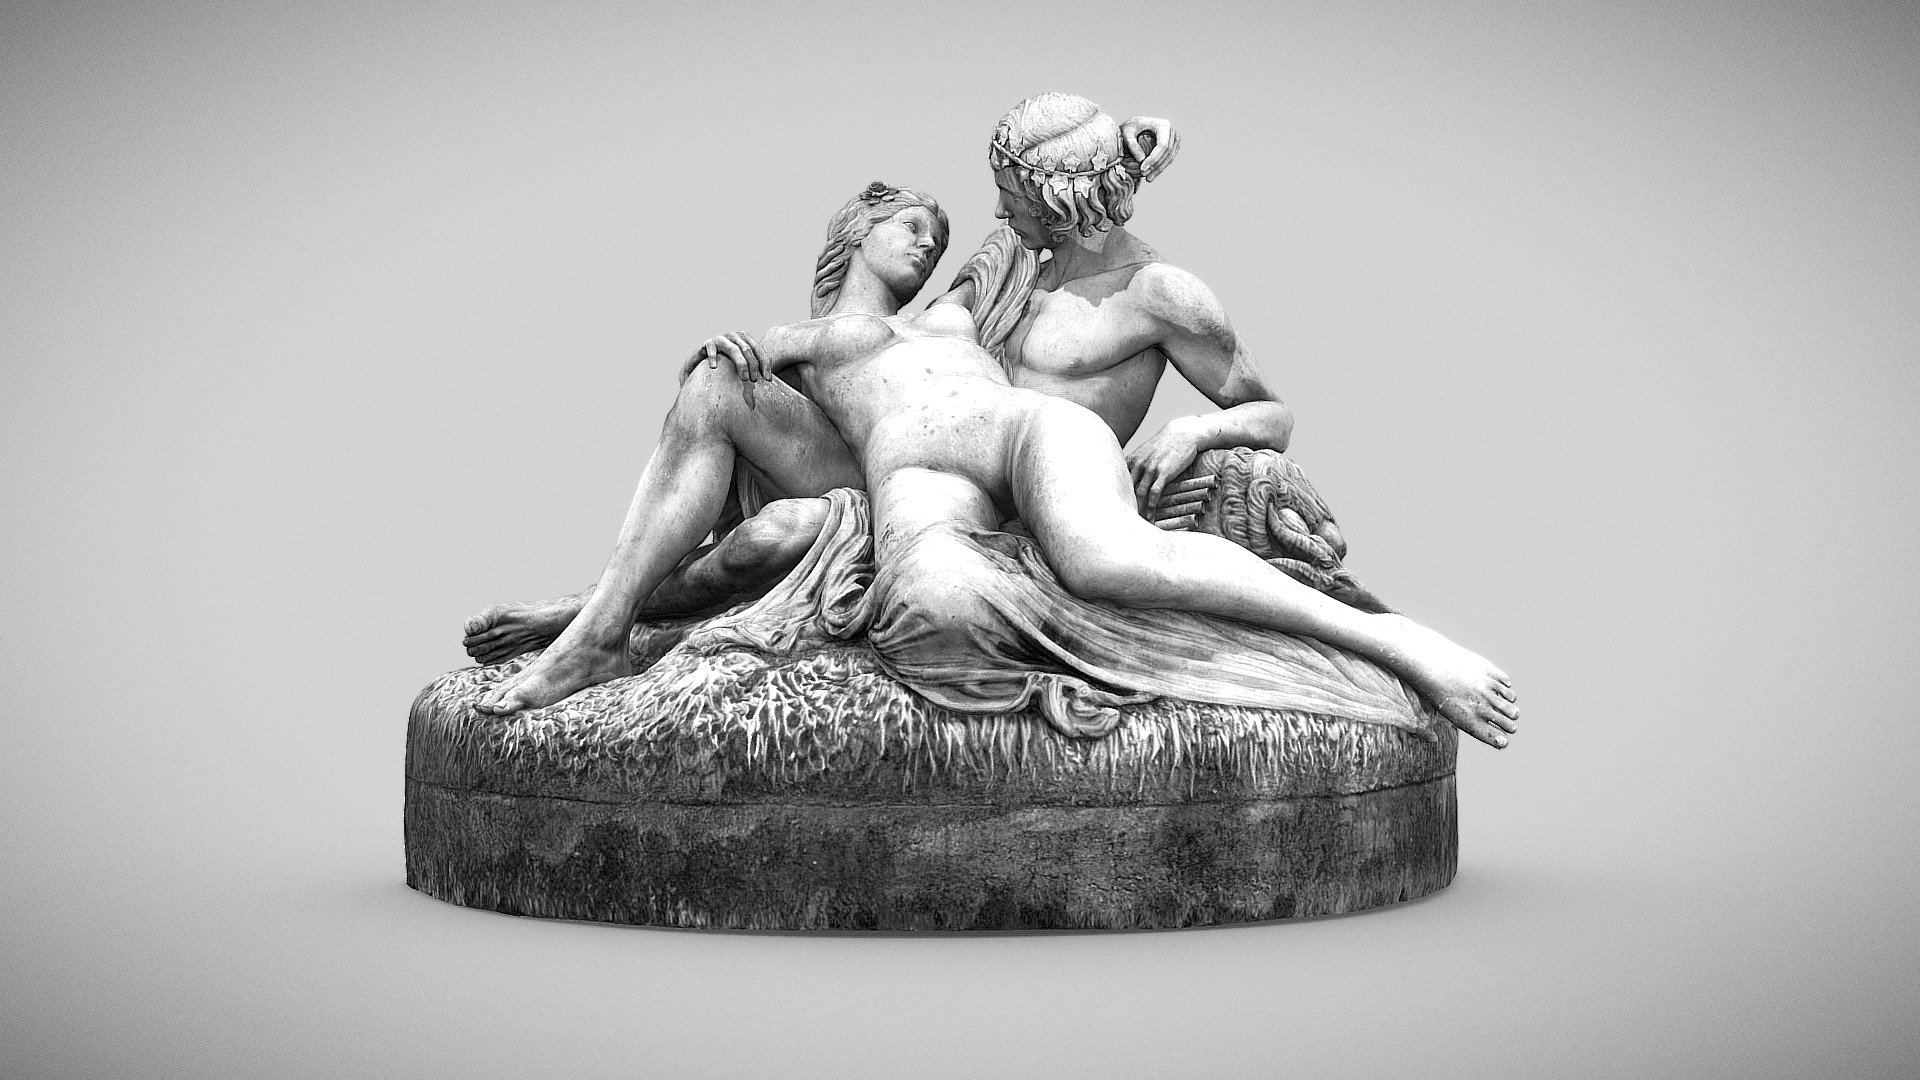 The Medici fountain is one of the most important decorative elements in the Jardin du Luxembourg.
As part of this partial repoduction exercise of the place, I chose to present you Acis and Galatea 
which I entirely modeled in 3D studio max, sculpted in zbrush, reworked in 3d coat and textured in Photoshop 3d model